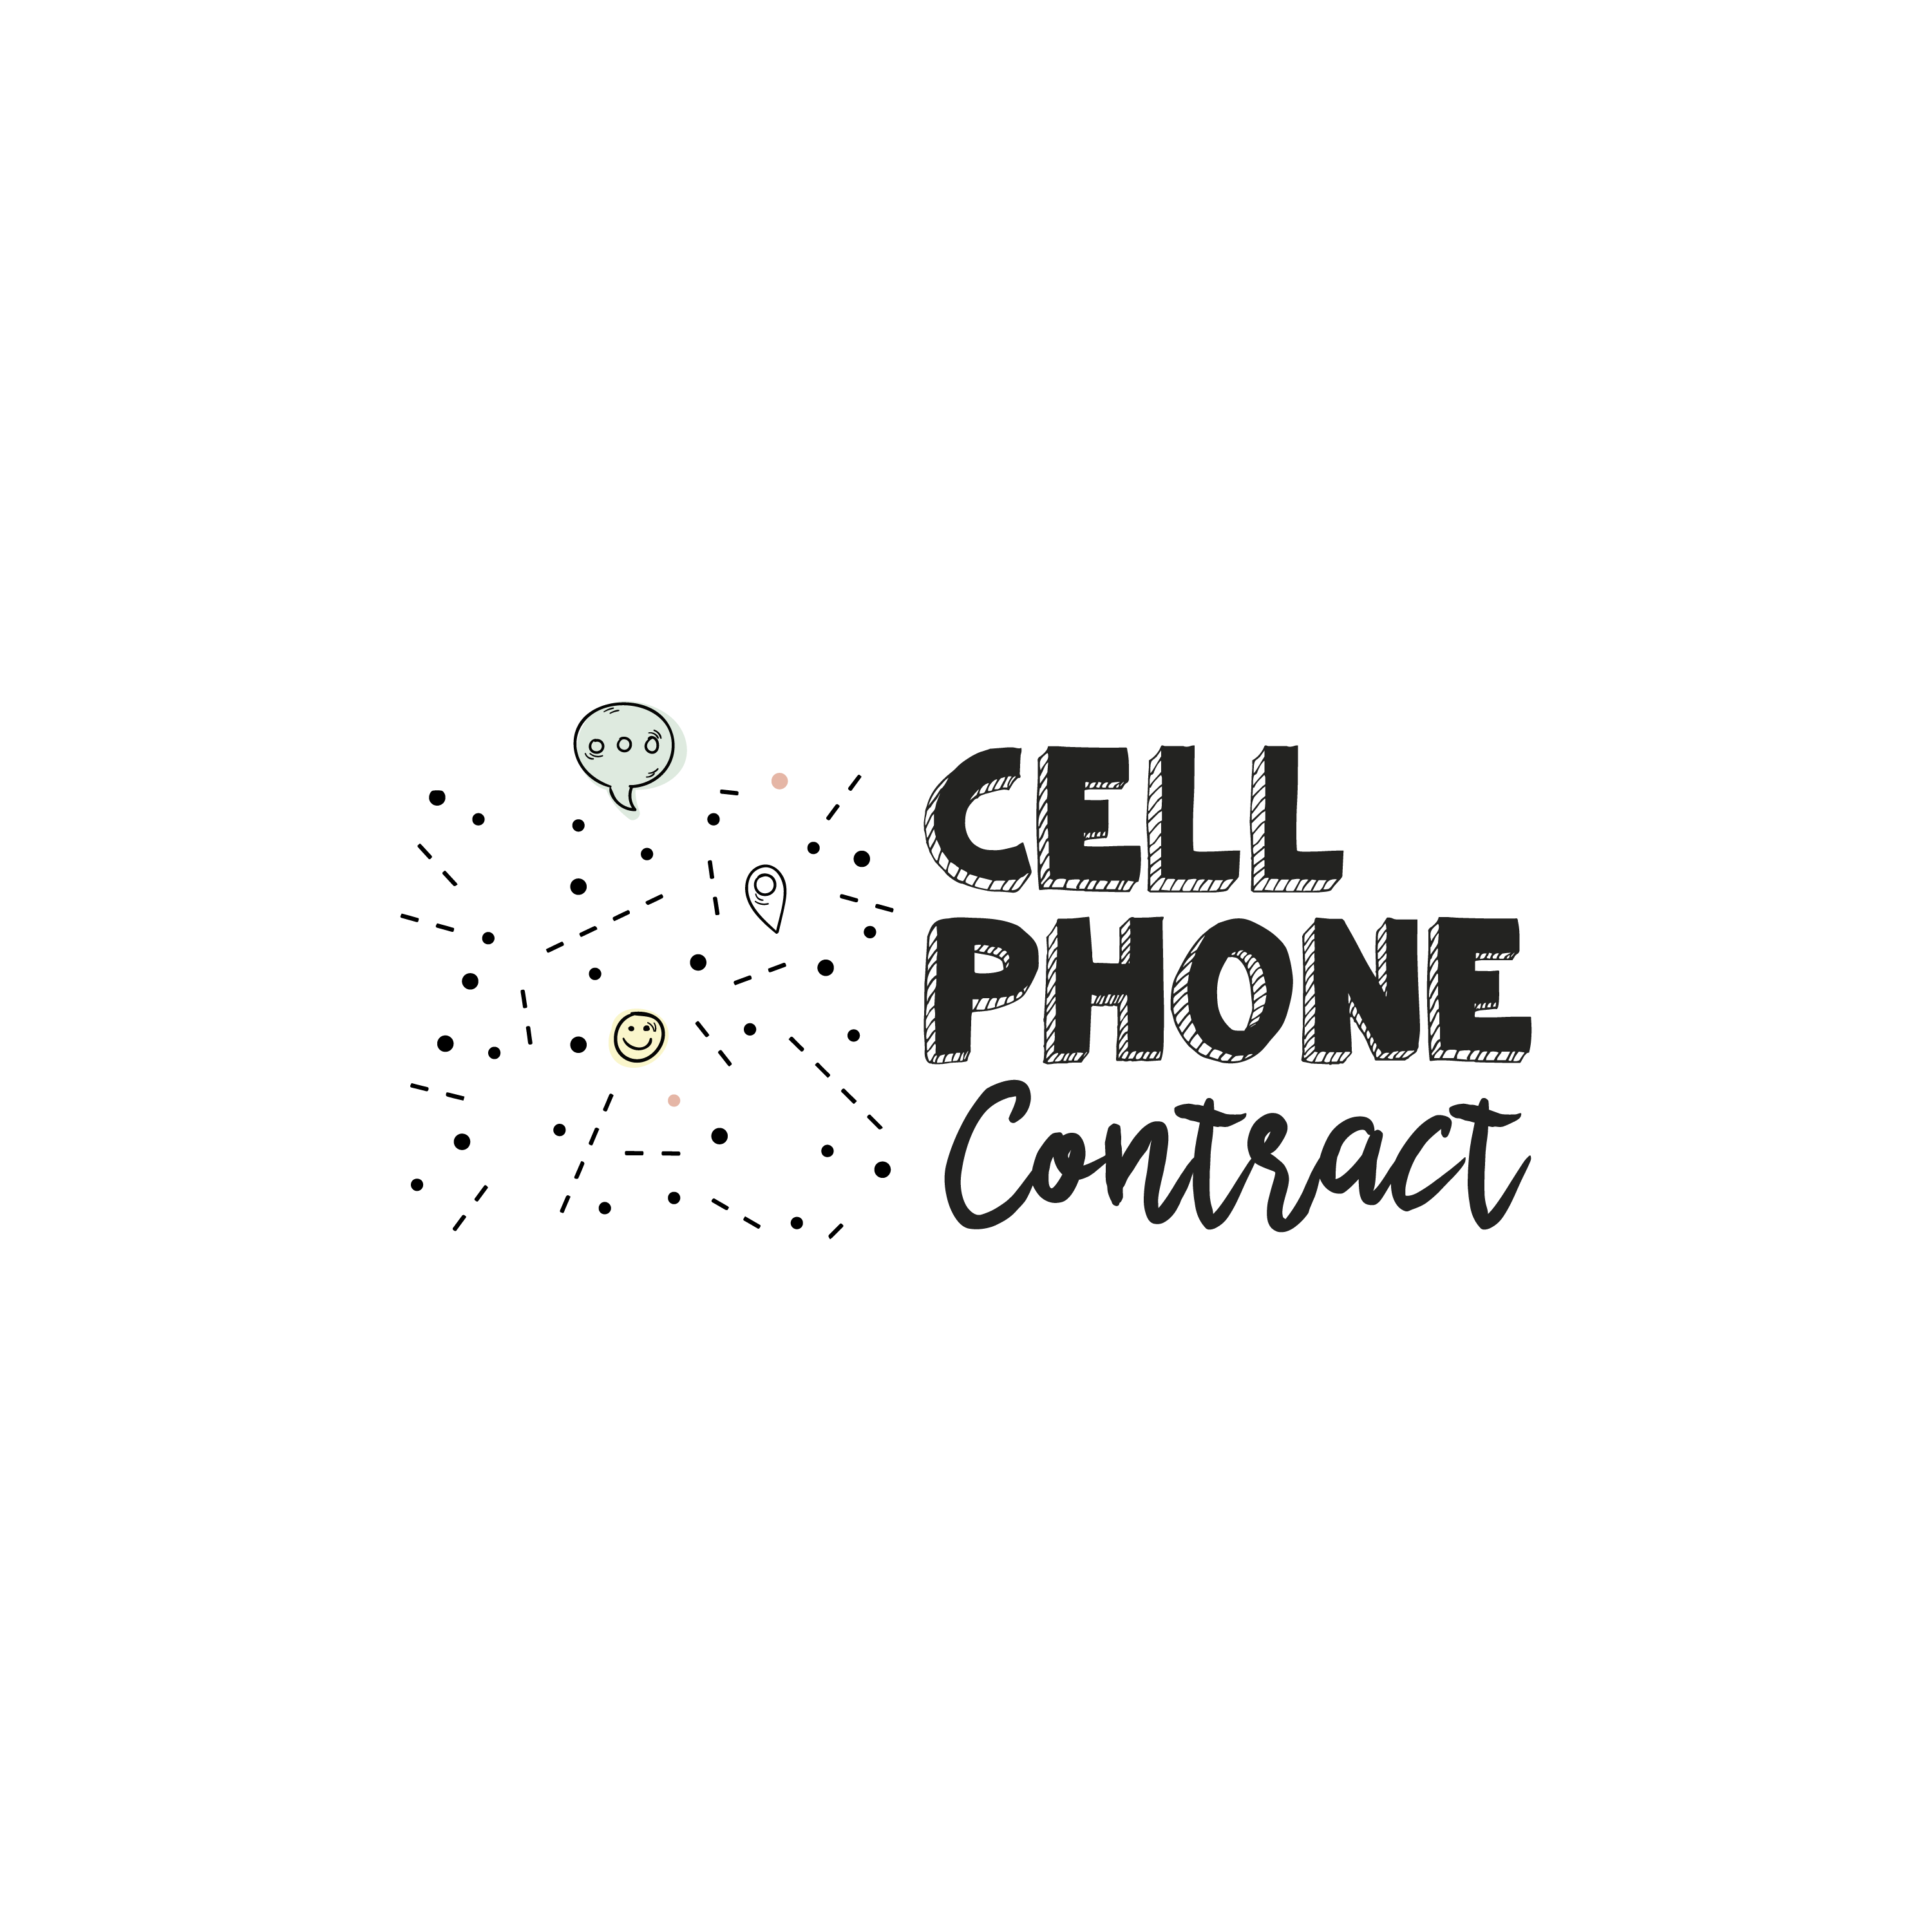 English version of the logo of the cell phone contract to print made by Les Belles Combines